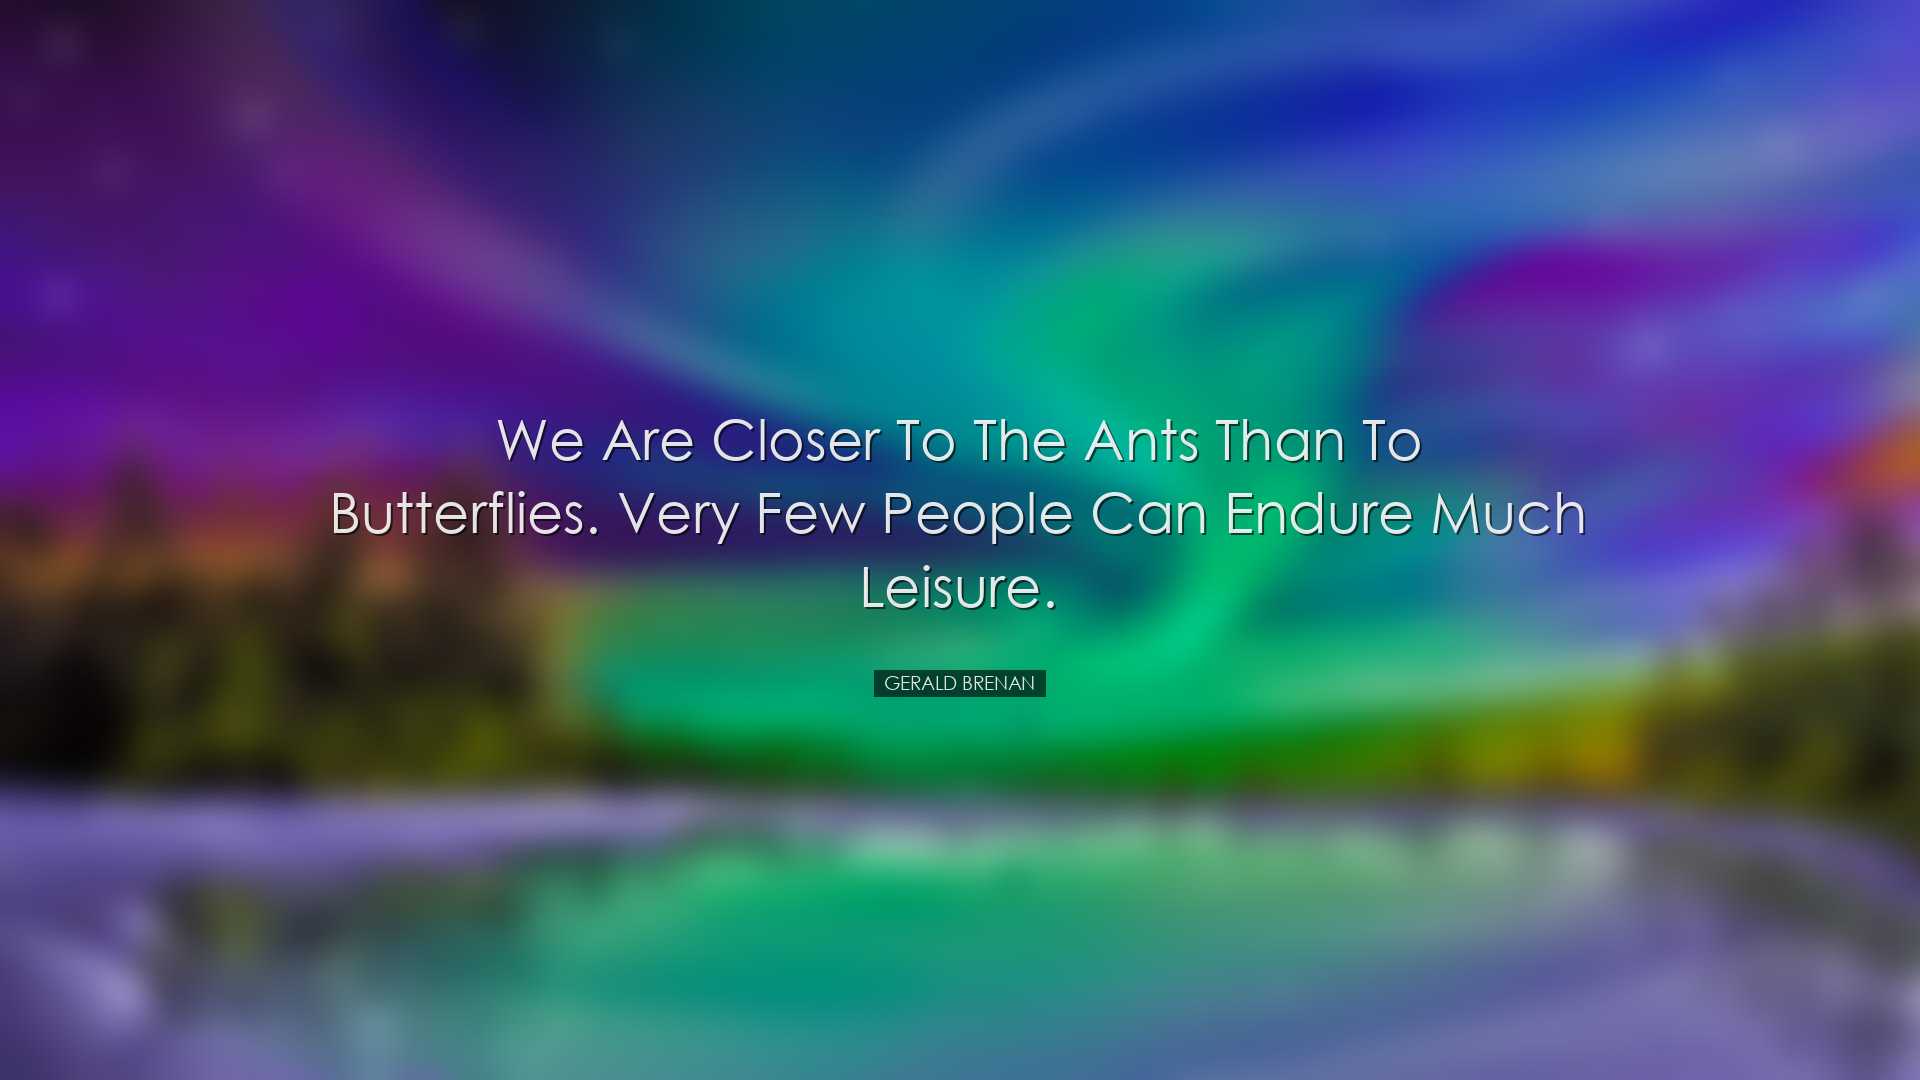 We are closer to the ants than to butterflies. Very few people can